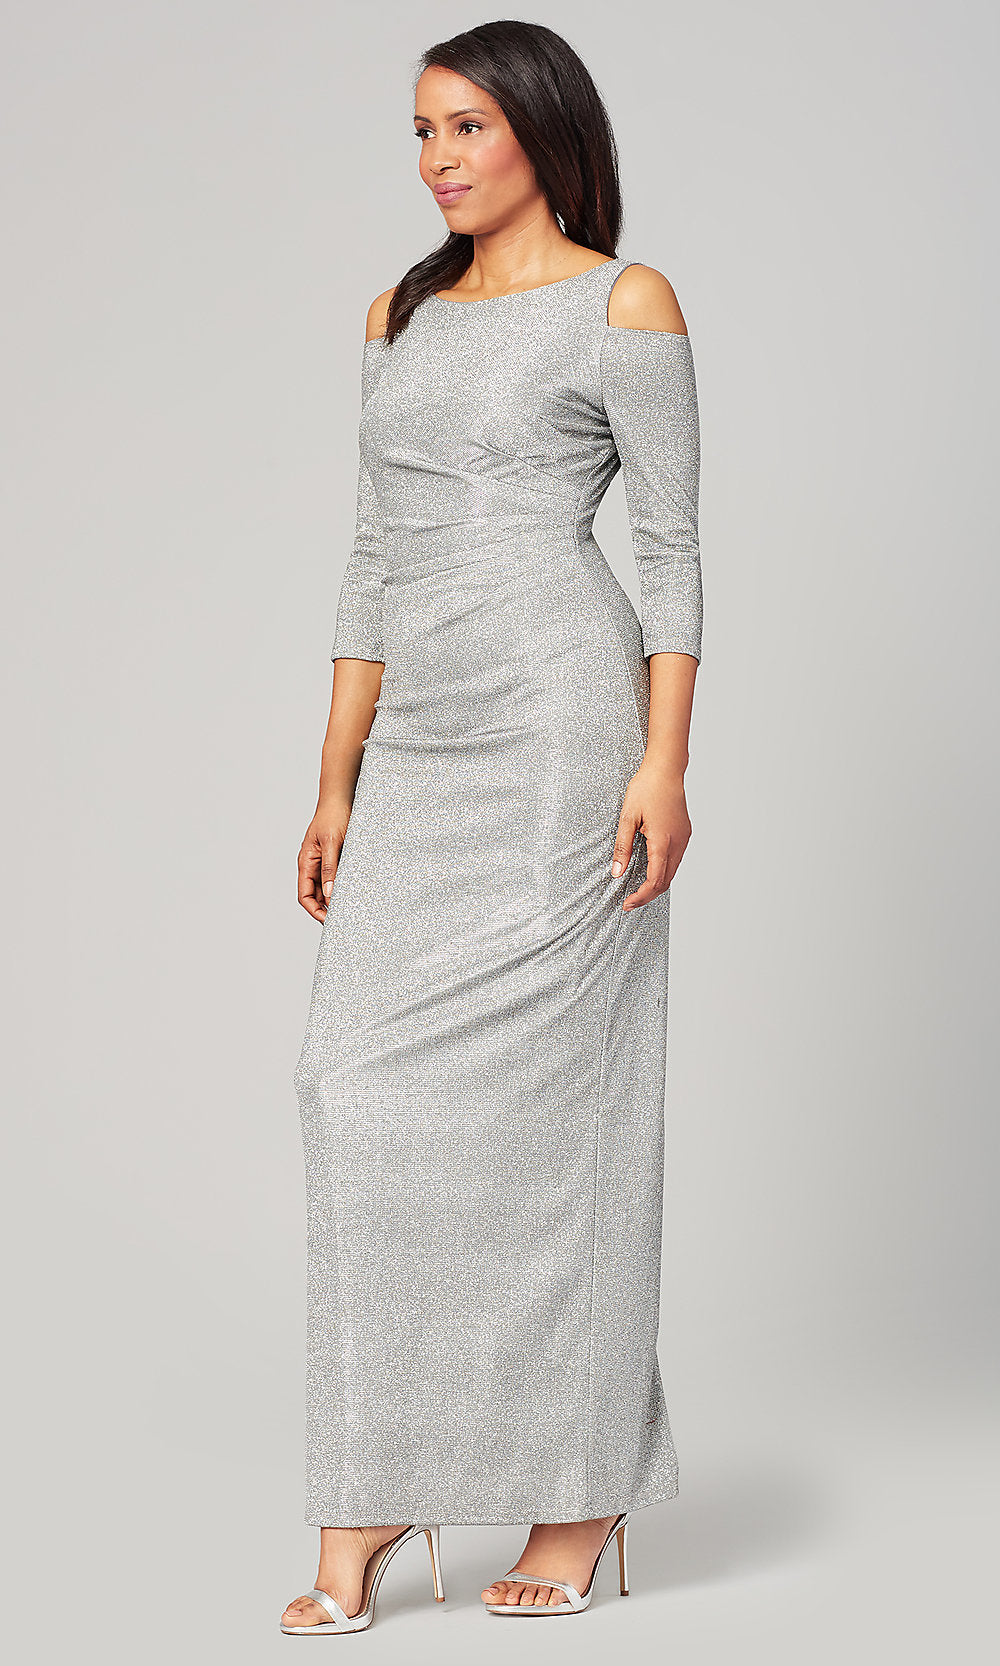 Pewter Pewter Silver Long Mother-of-the-Bride Dress